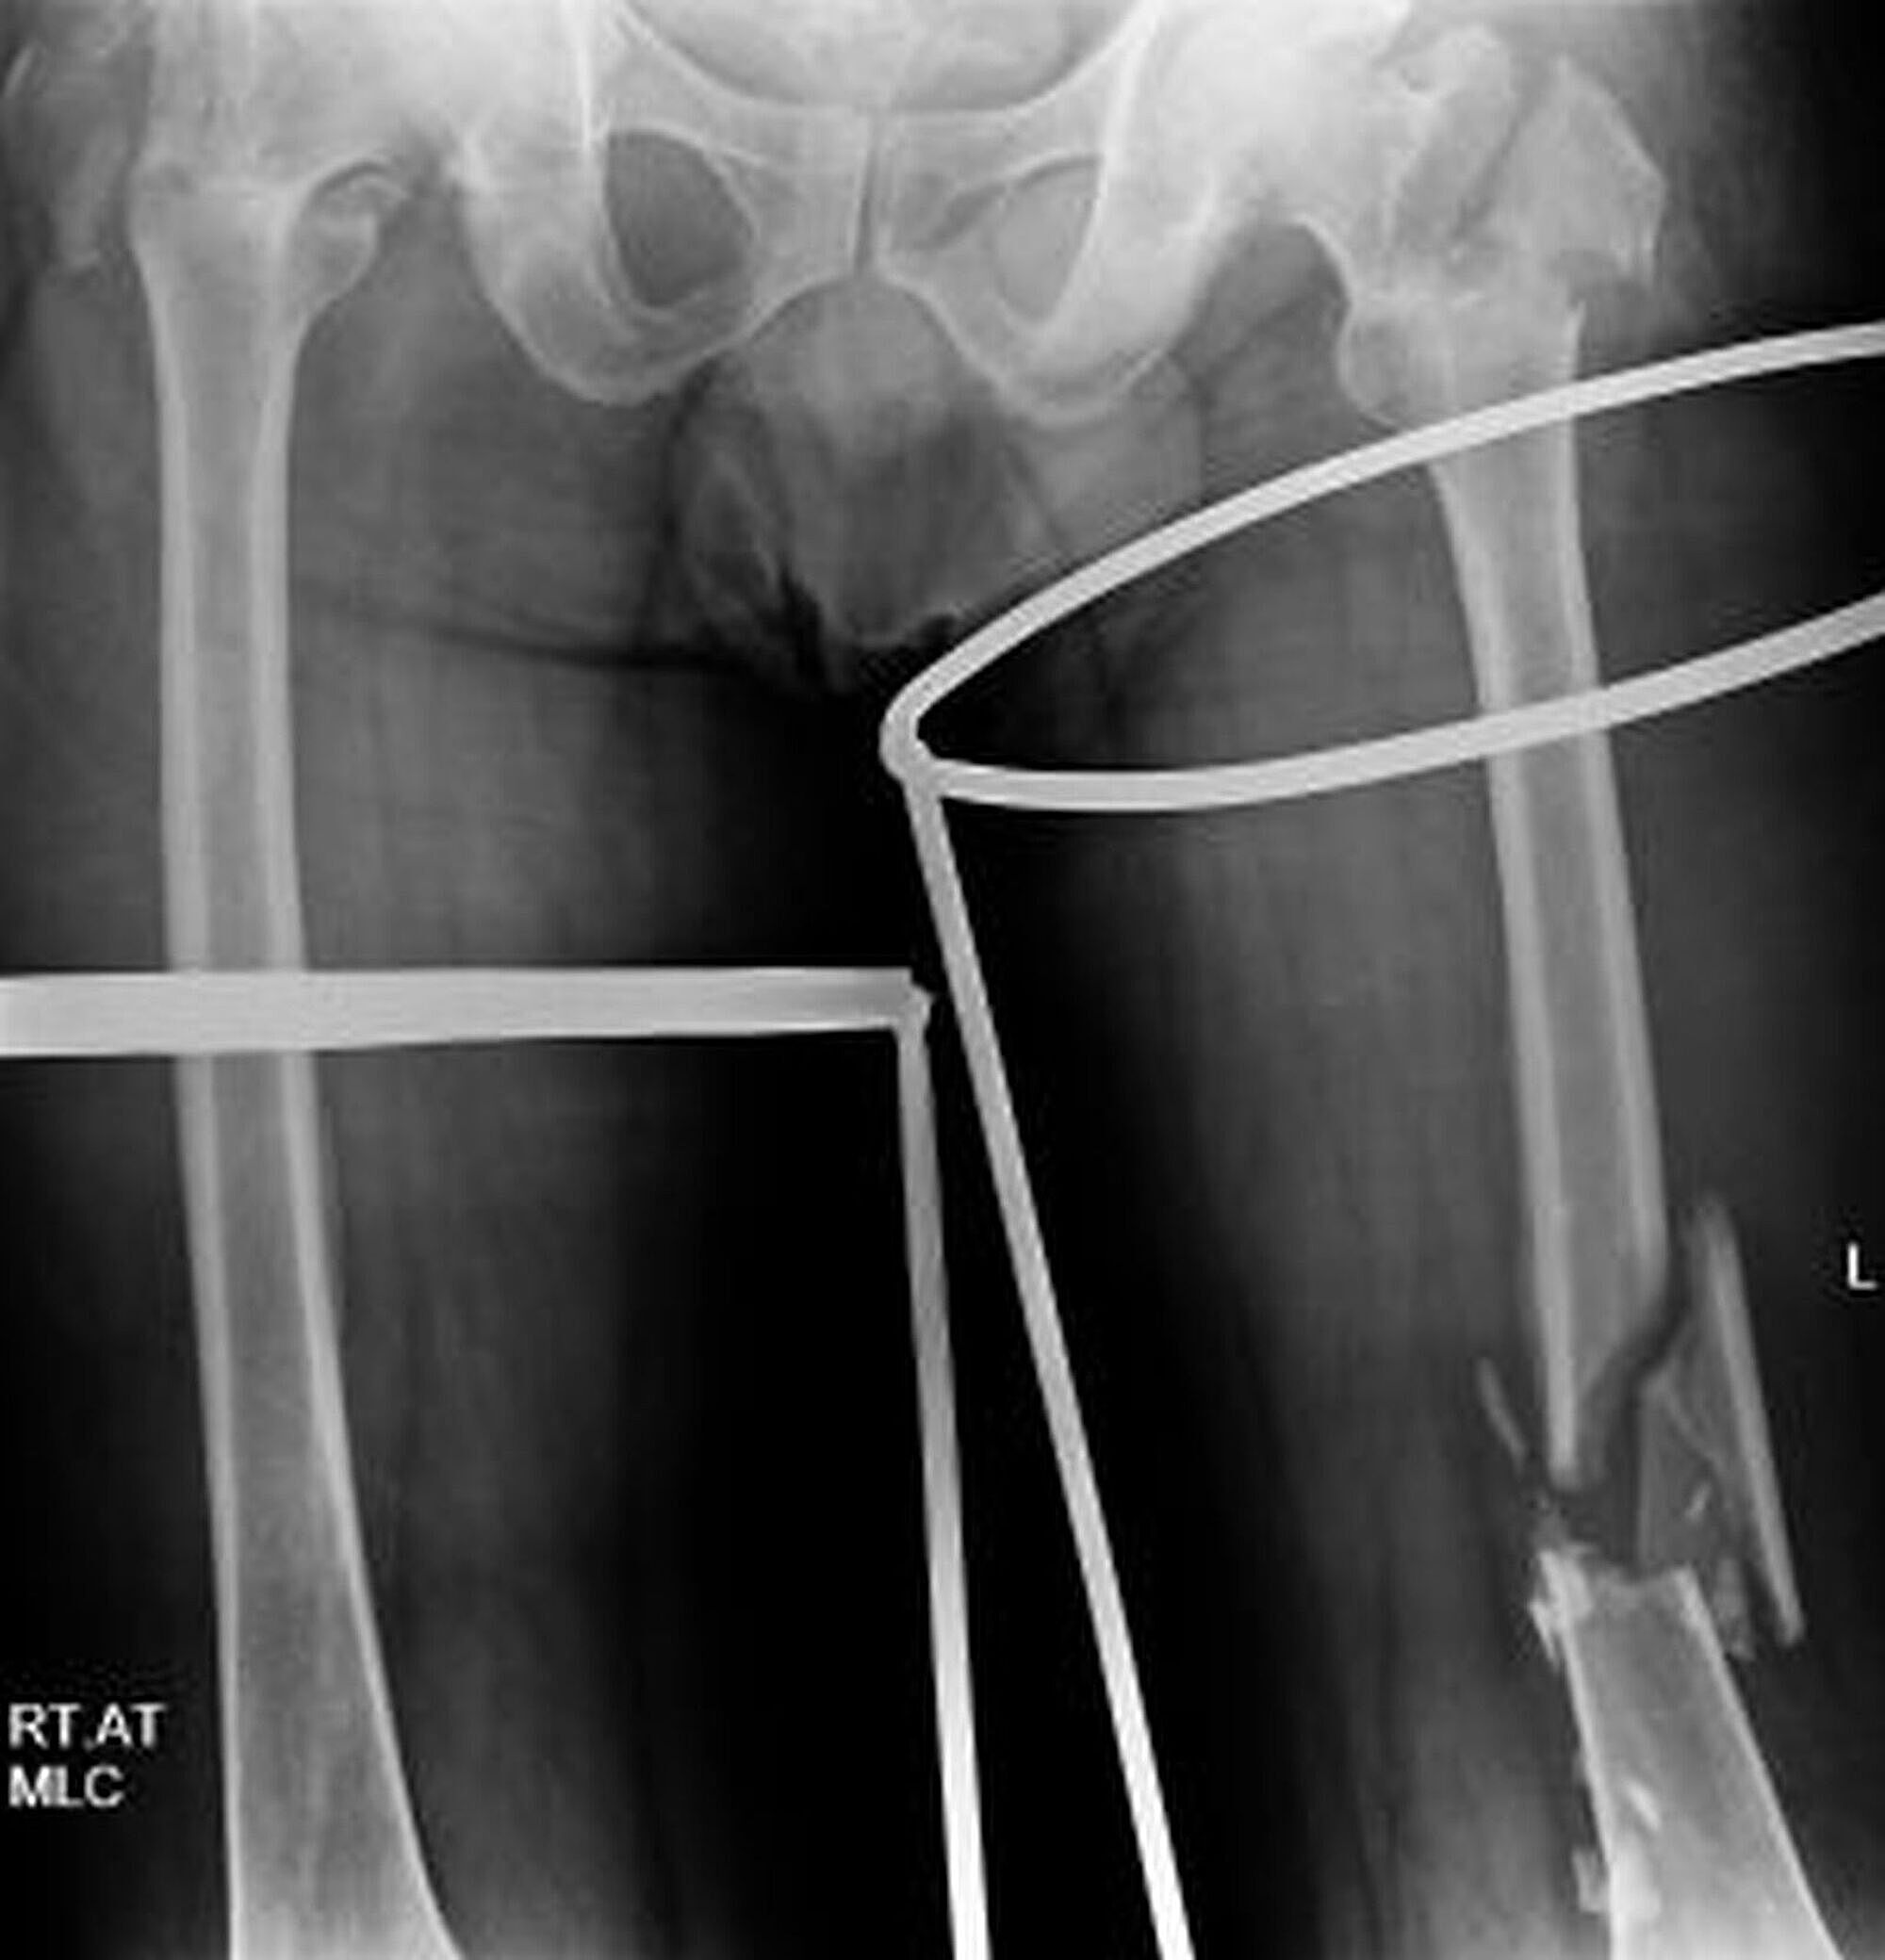 right femoral intertrochanteric fracture icd 10